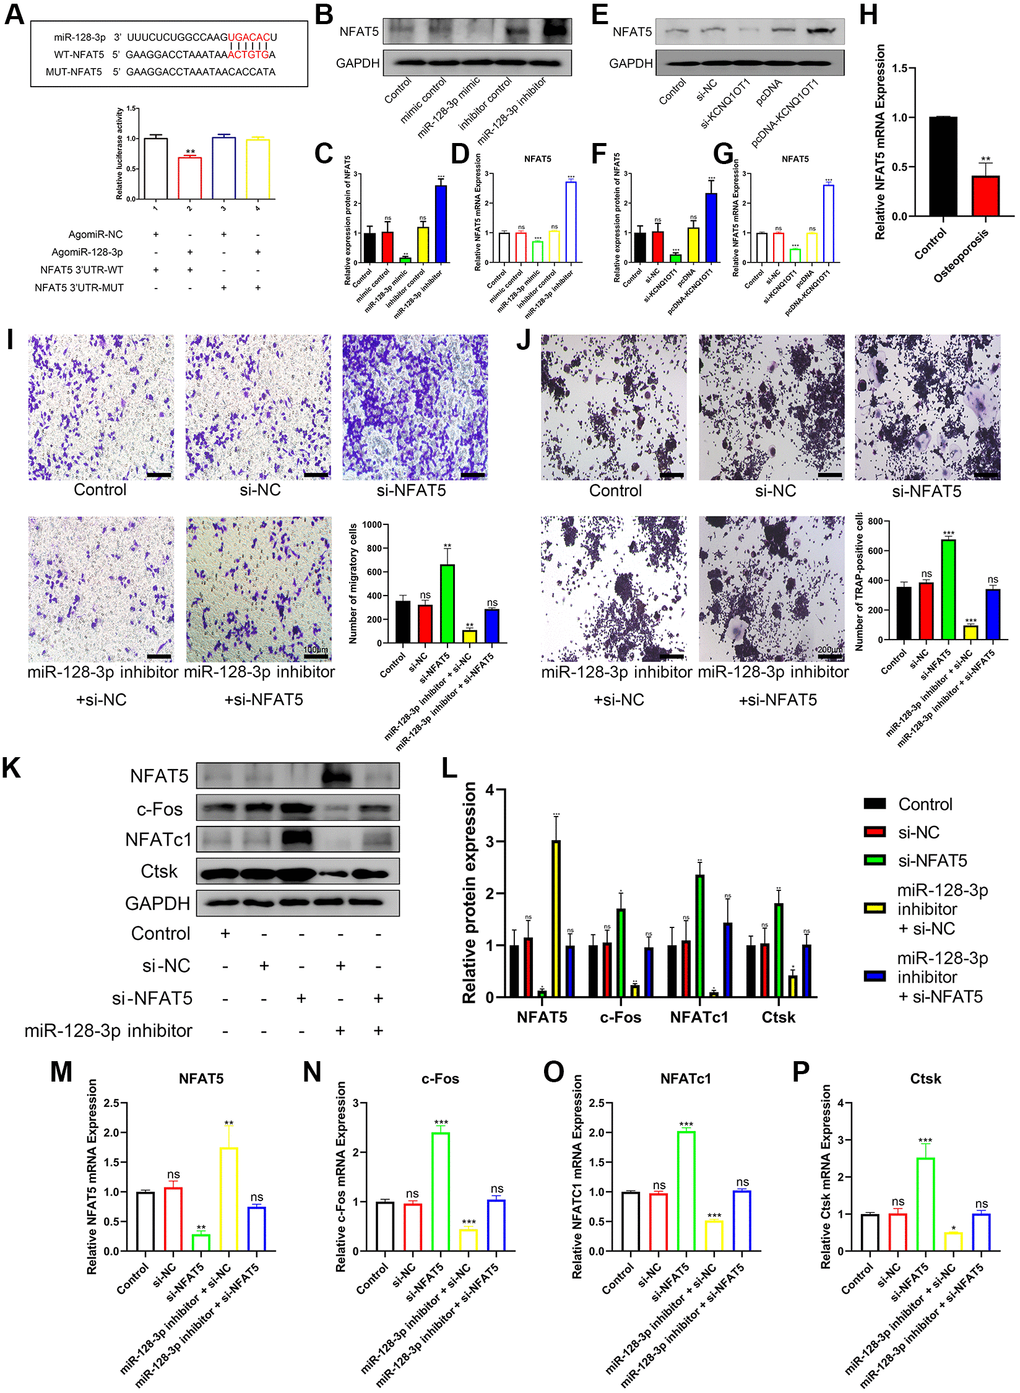 miR-128-3p regulates the migration and osteoclast differentiation of RAW 264.7 cells by targeting NFAT5. (A) StarBase database showing the putative binding sites between miR-128-3p and NFAT5. The relative luciferase activity was detected in HEK-293T cells transfected with agomiR-NC or agomiR-128-3p in WT and MUT groups, respectively. (B–D) The mRNA and protein expression of NFAT5 after transfection of miR-128-3p mimic or miR-128-3p inhibitor, were analyzed by qRT-PCR and Western blotting, respectively. (E–G) The mRNA and protein expression of NFAT5 after transfection of pcDNA-KCNQ1OT1 or si-KCNQ1OT1, were analyzed by qRT-PCR and Western blotting, respectively. (H) Relative expression of NFAT5 in non-osteoporotic and osteoporotic bone tissues was detected by qRT-PCR (N = 6, 3 osteoporotic and 3 non-osteoporotic). (I) The influence on cell migration ability of si-NFAT5 and the rescue effect of miR-128-3p inhibitor was assessed by transwell migration assay (Scale bar: 100 μm). (J) Multinucleated osteoclasts were stained by TRAP and then counted (Scale bar: 200 μm). (K–P) Five days after osteoclastic differentiation, qRT-PCR and Western blotting were performed to detect the mRNA and protein levels of NFAT5, c-Fos, NFATc1, and Ctsk in RAW 264.7 cells transfected with si-NFAT5, miR-128-3p inhibitor or si-NFAT5 + miR-128-3p inhibitor. *P **P ***P 